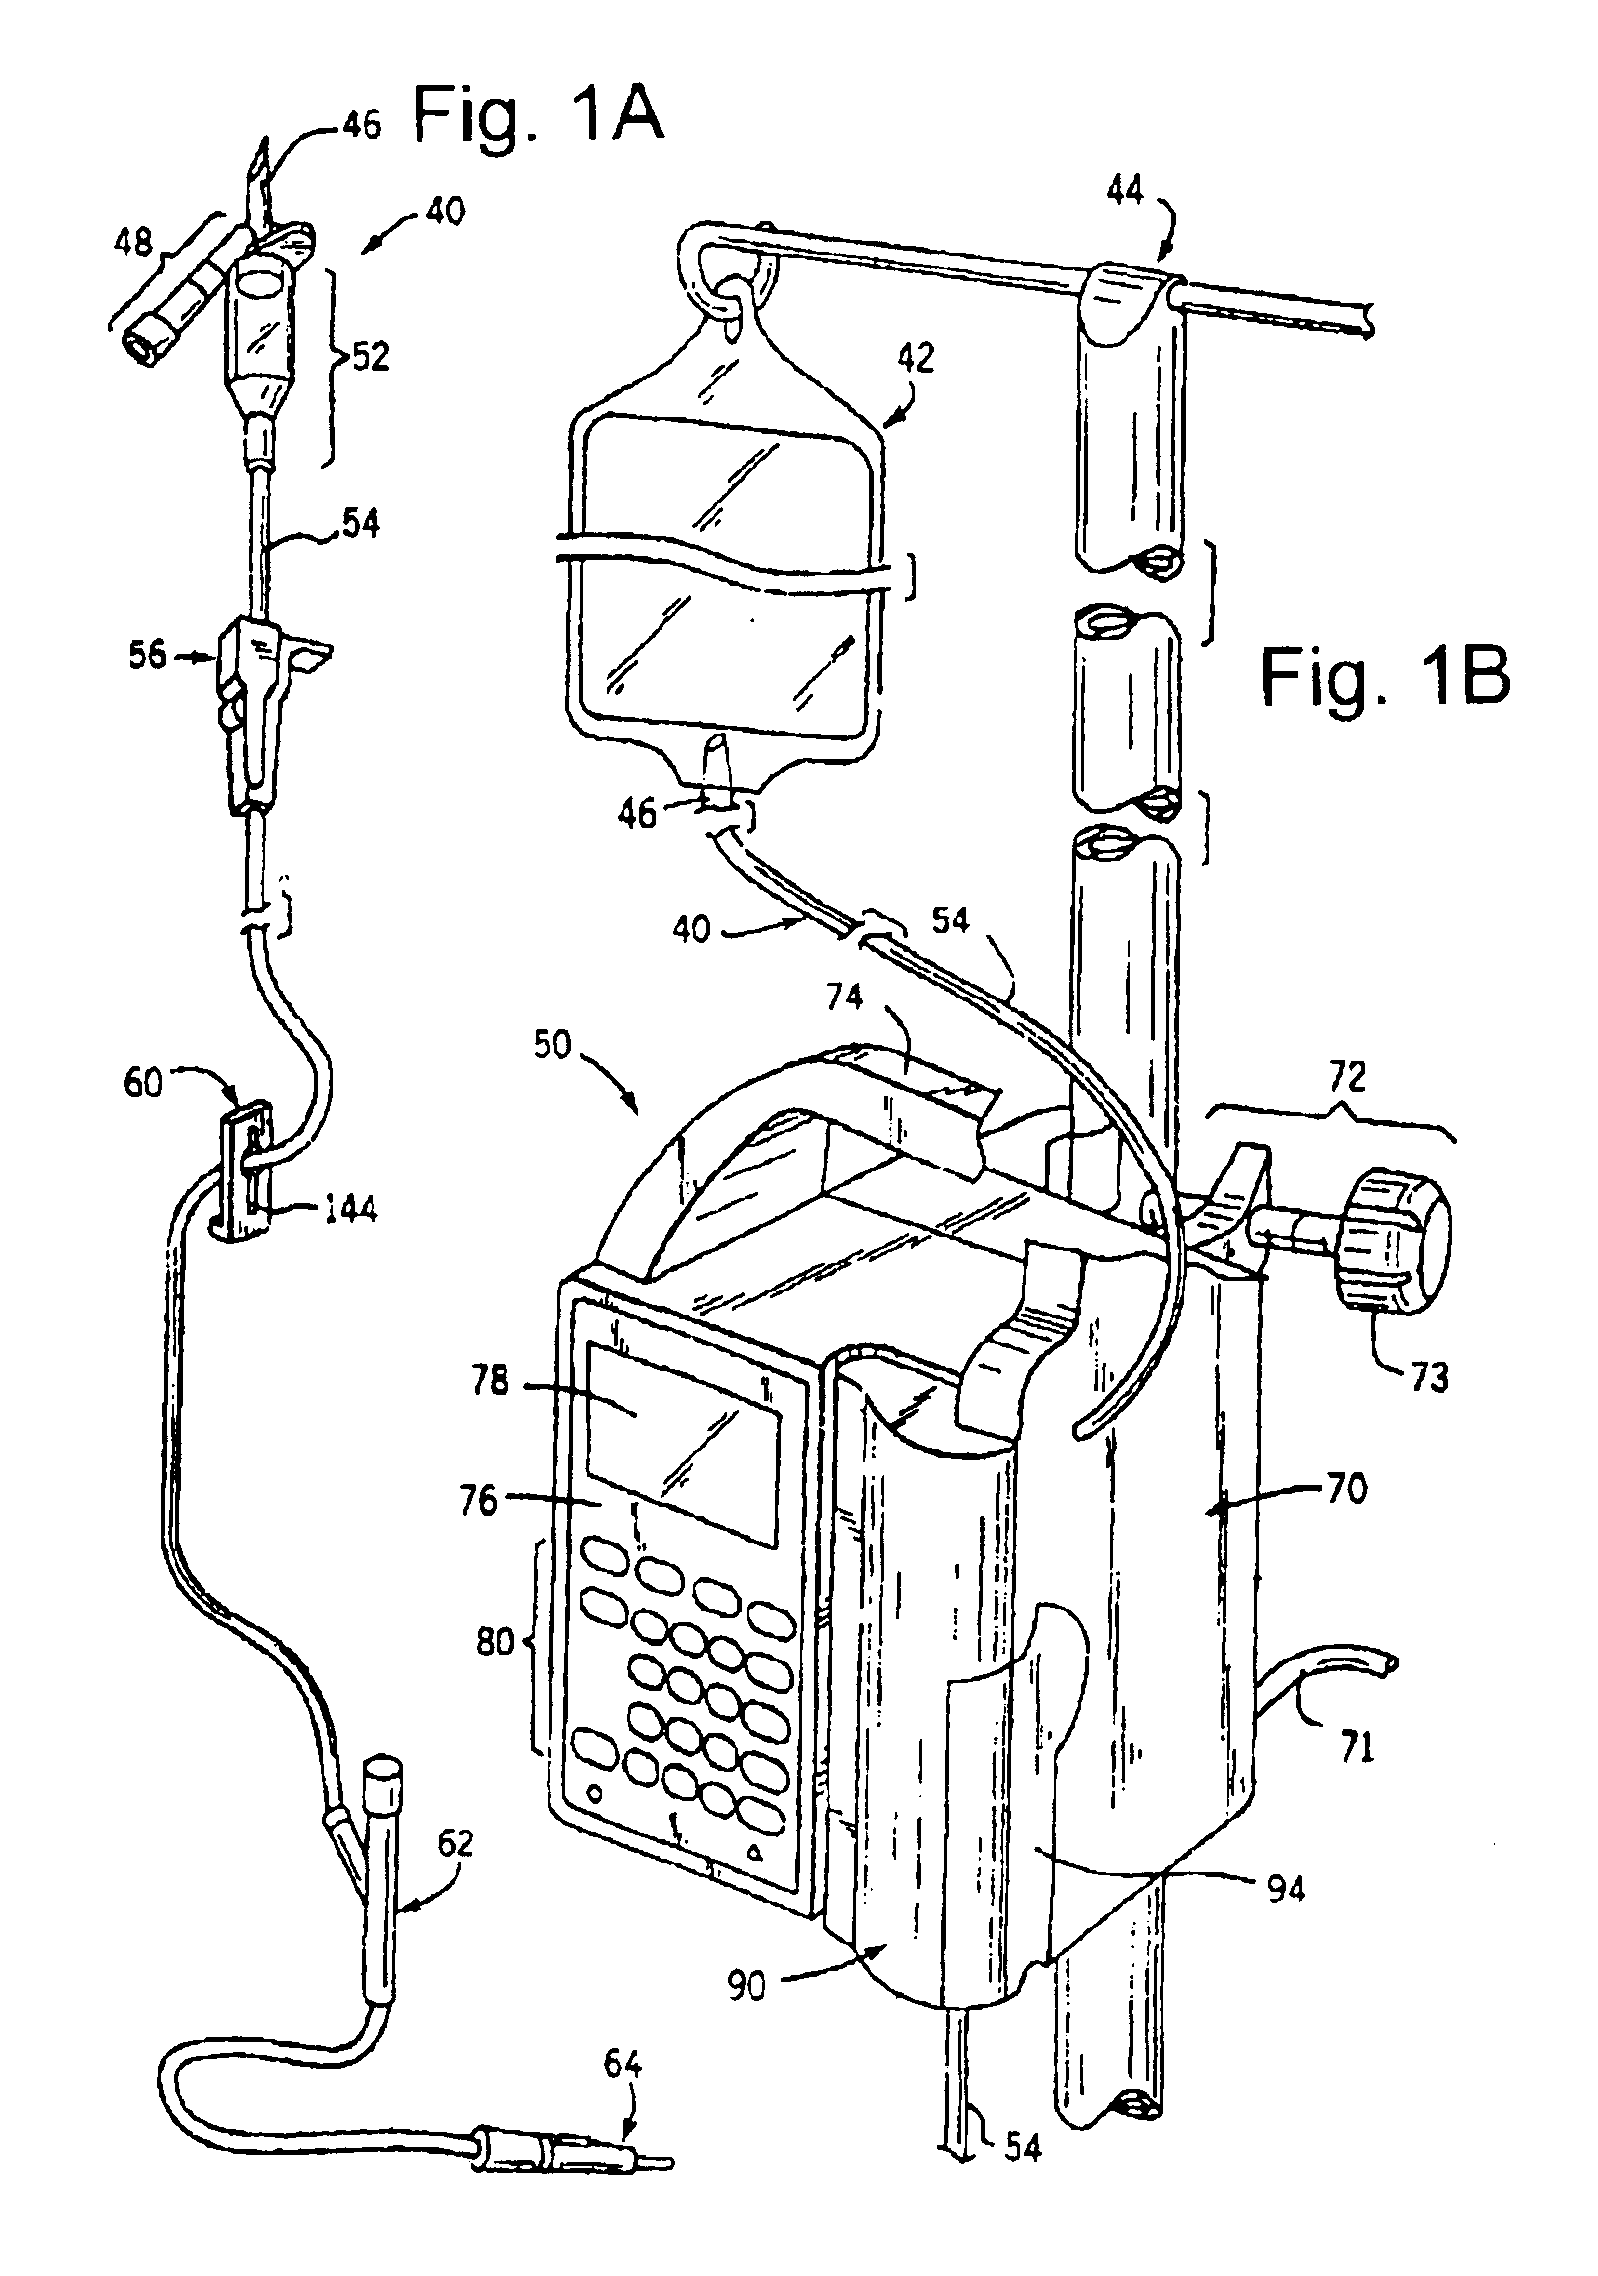 Device and method for qualitative and quantitative determination of intravenous fluid components